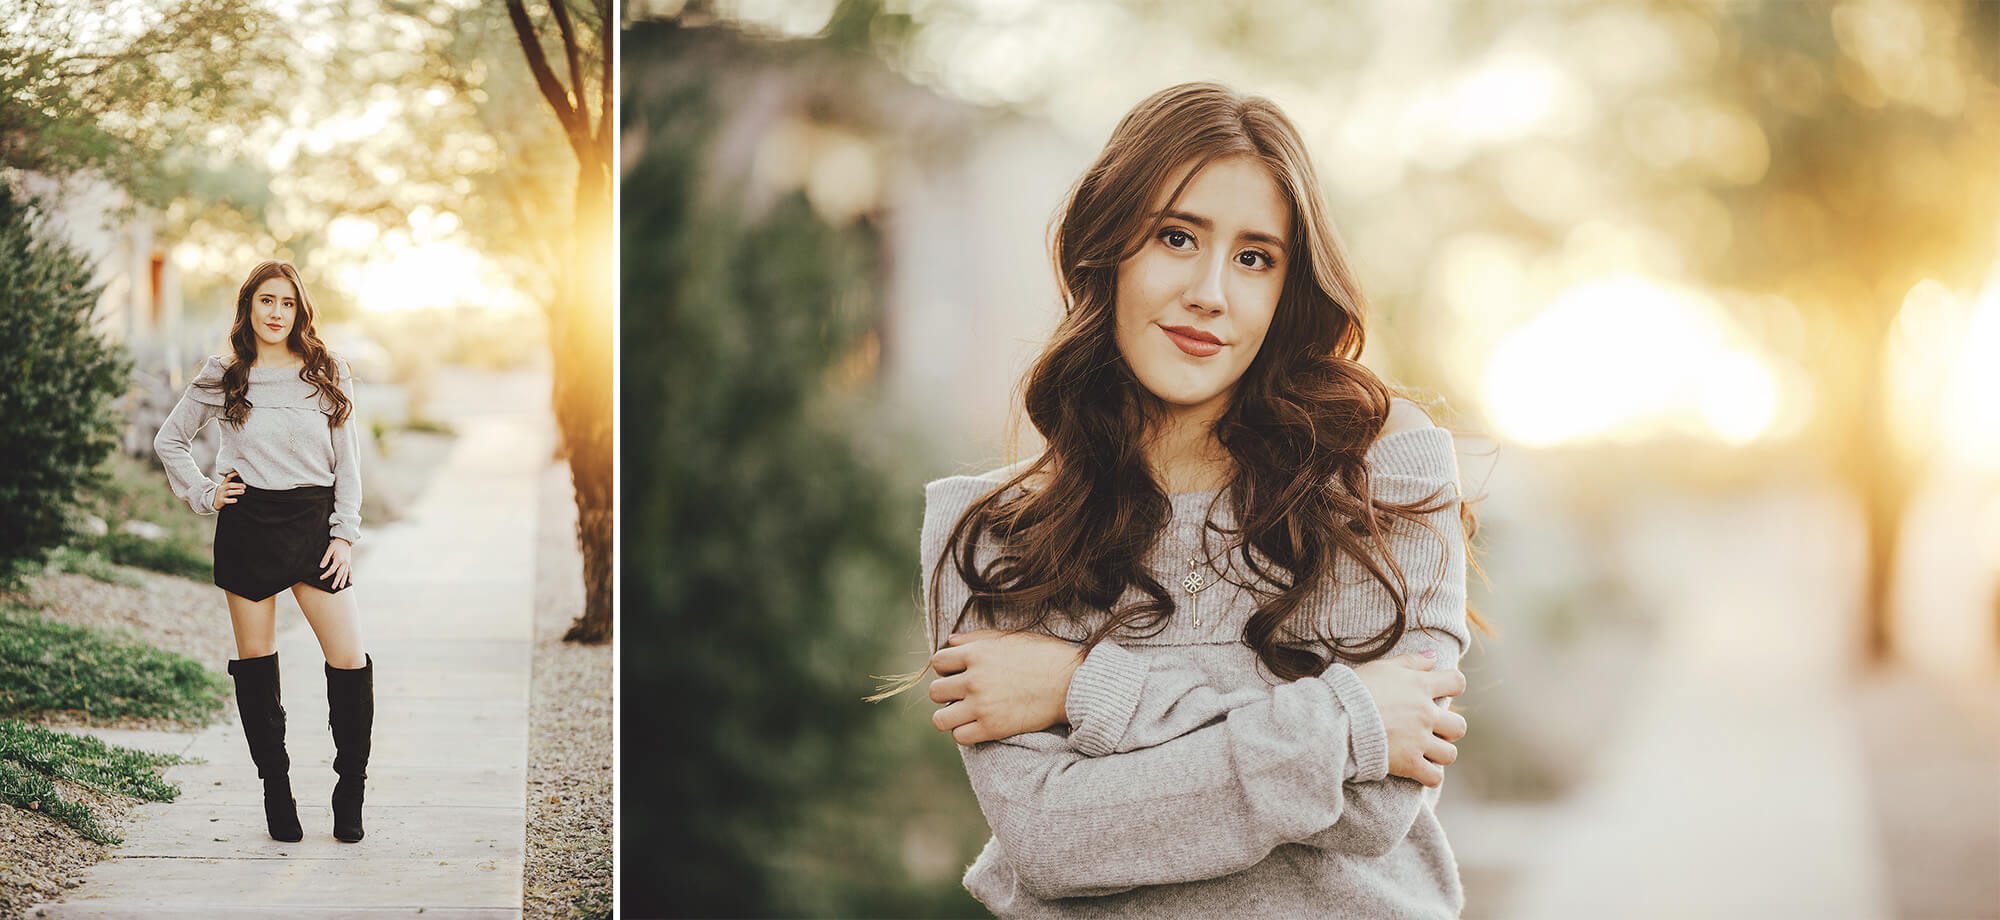 Brianna poses in a warm sweater as the sun sets behind her during her senior photoshoot in Civano